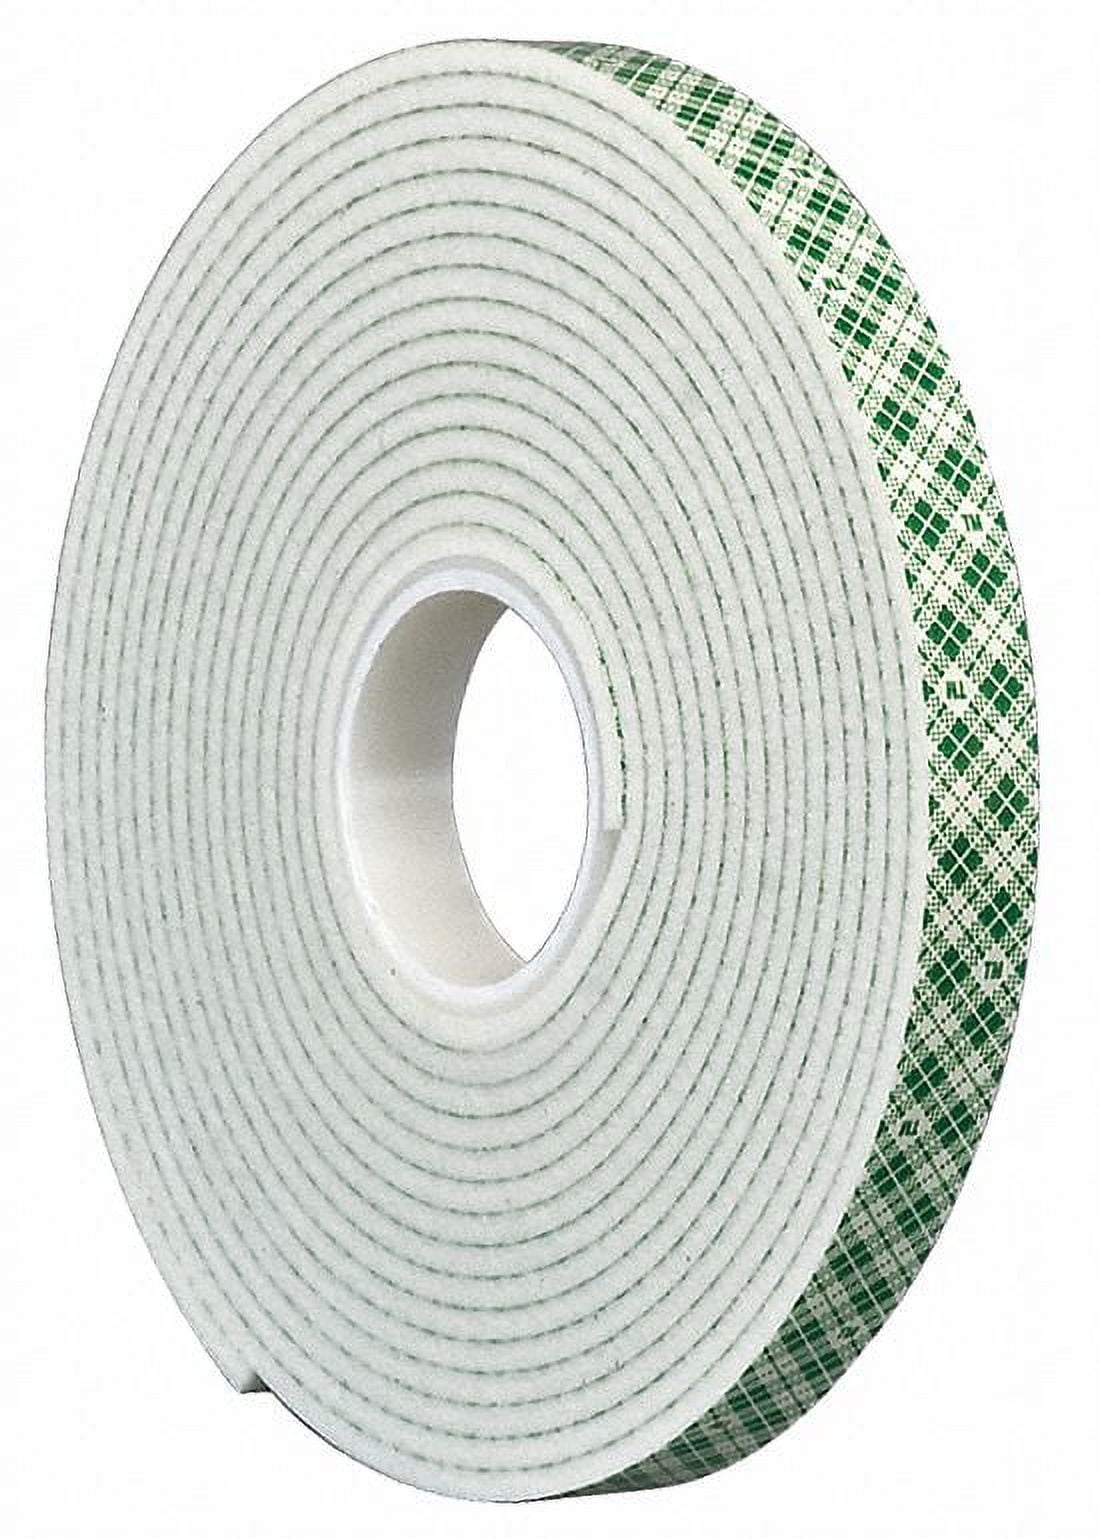 RecareTek Double Sided Tape 1.18x66FT Strong Sticky Thin Fabric Carpet  Tape with Fiberglass Mesh Adhesive Keeps Rugs in Place on